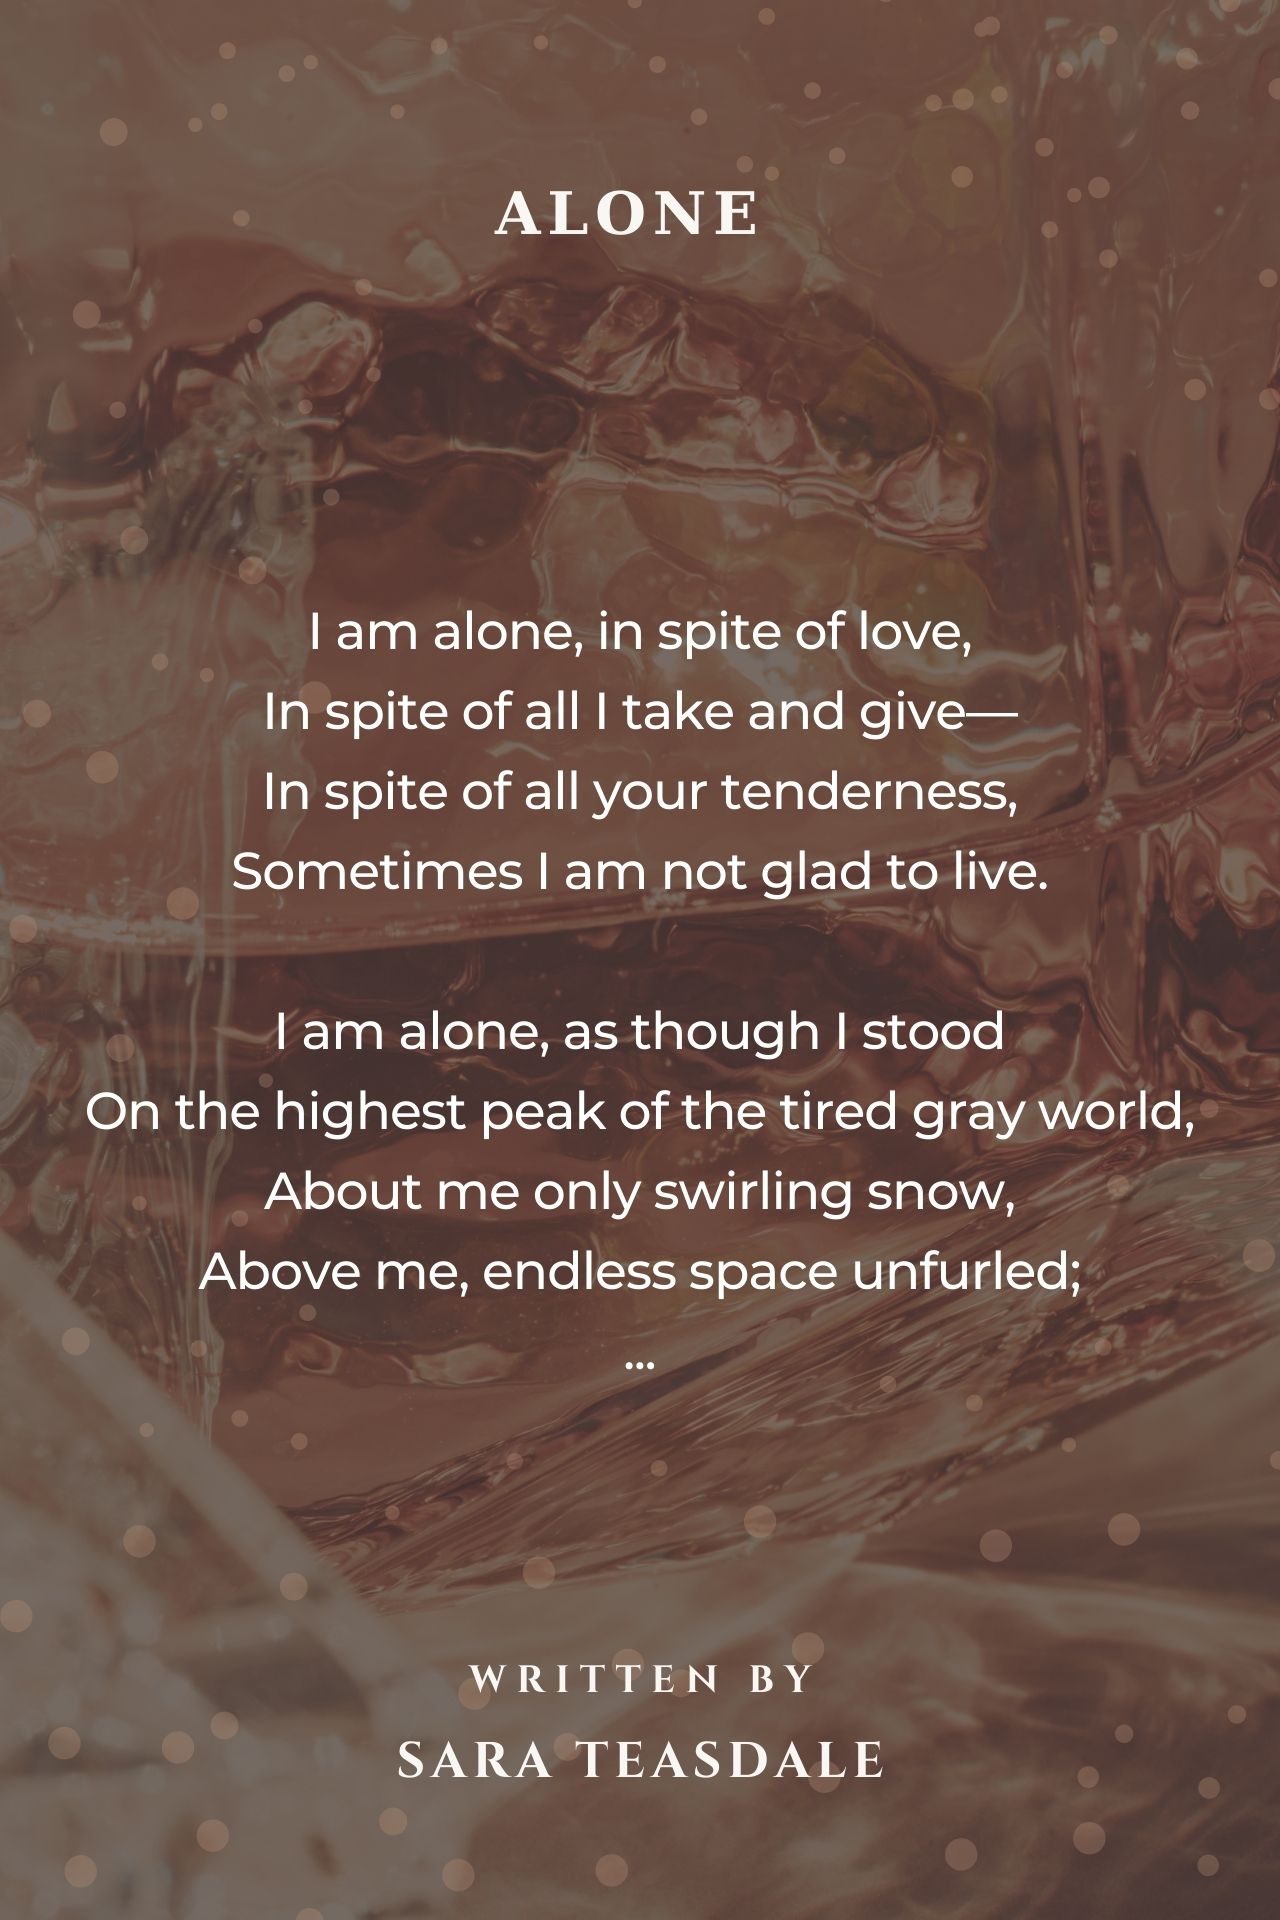 44 Being Alone Quotes to Embrace Your Solitude